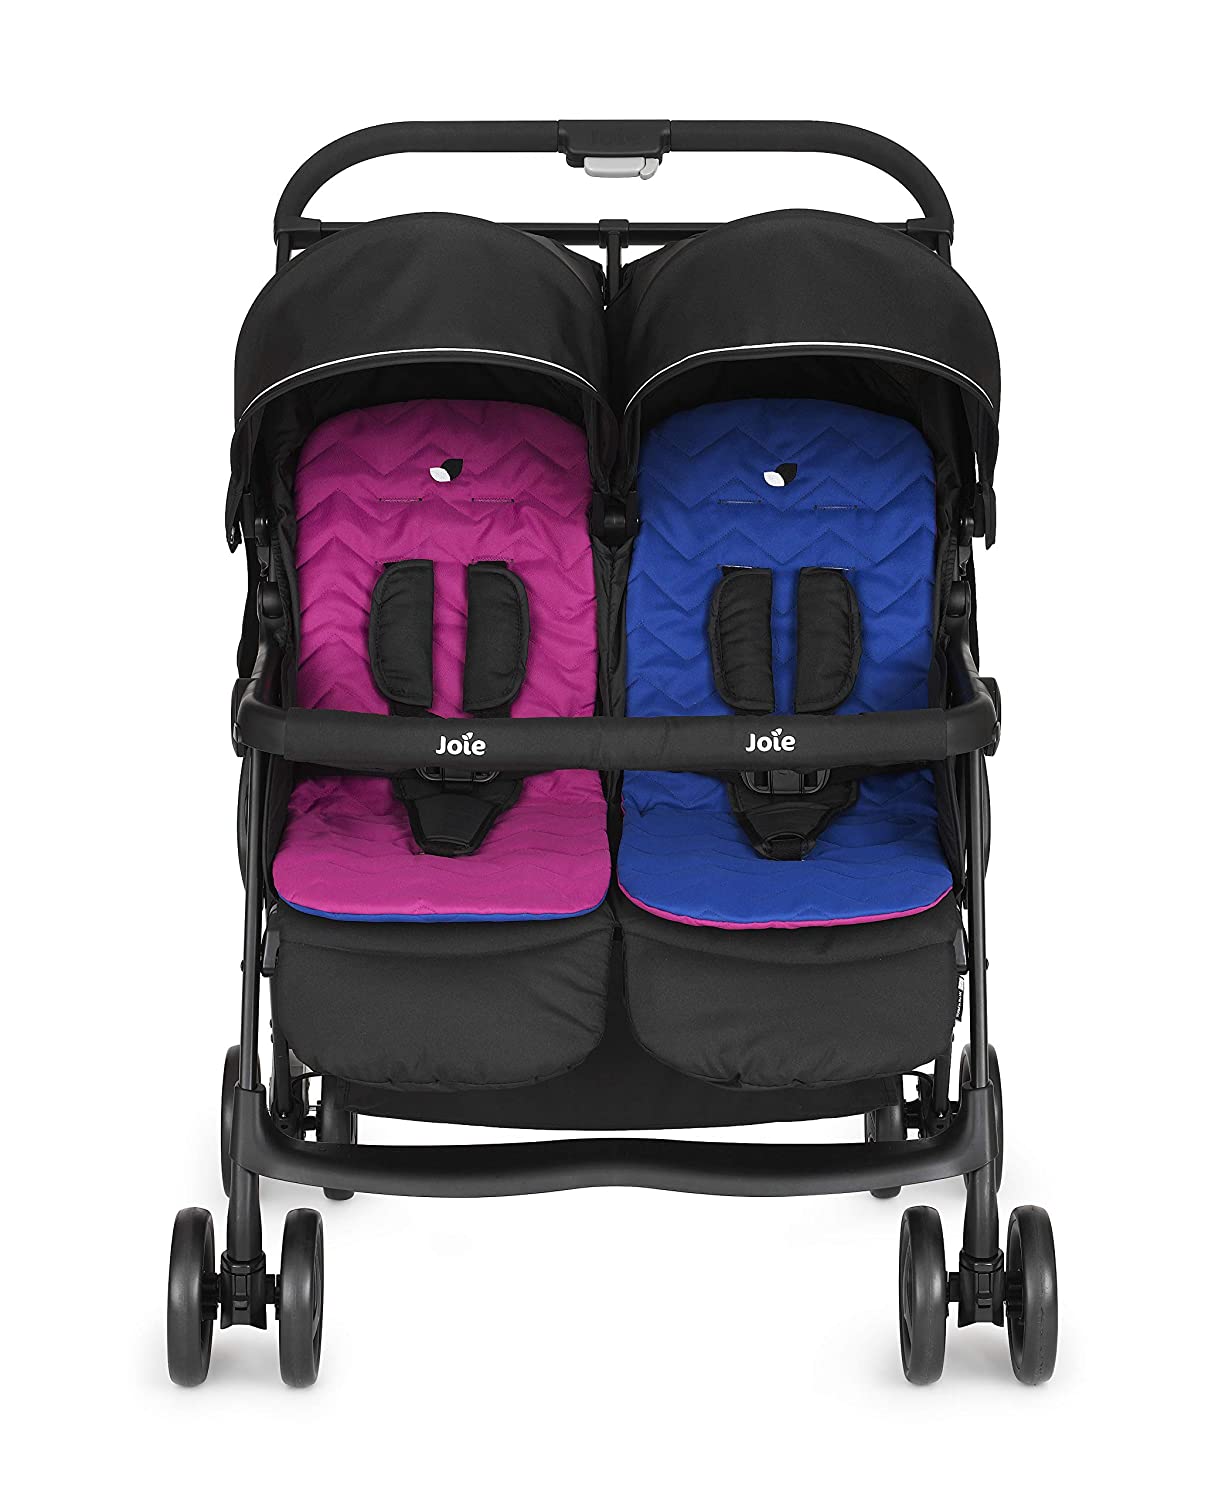 Joie Aire Twin Lightweight and One hand Fold Stroller